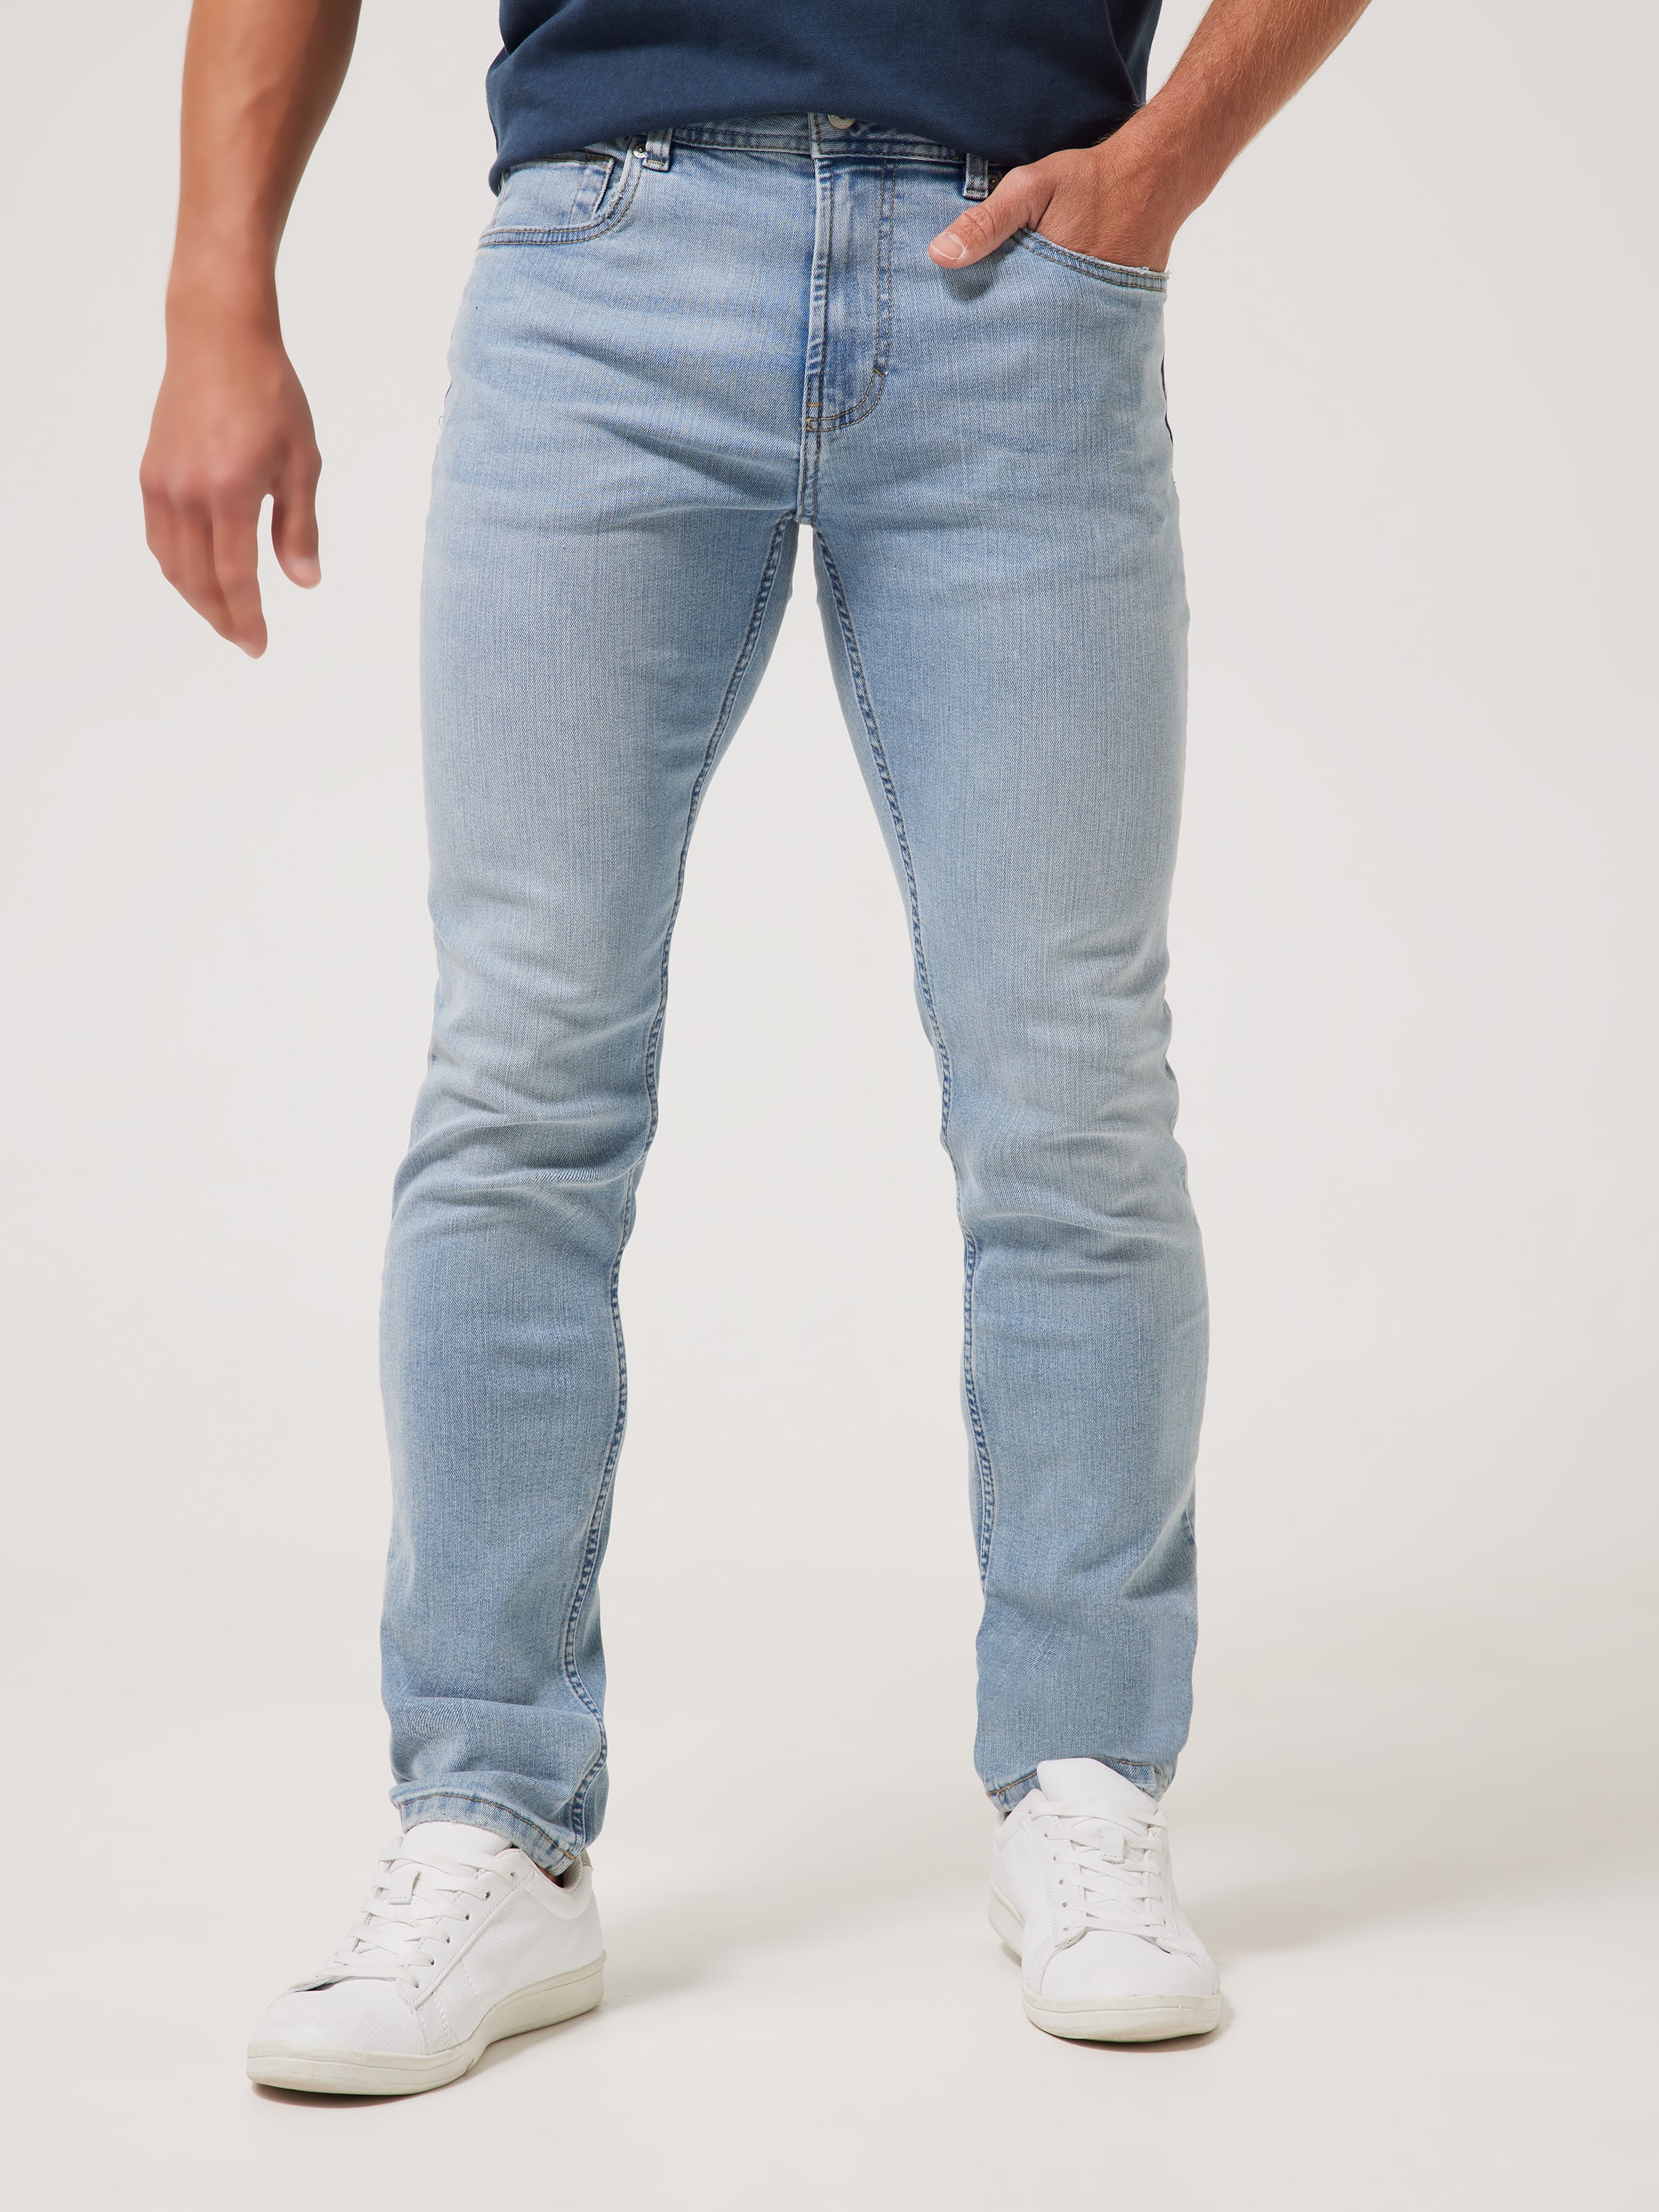 Jeans Homme : Skinny, Slim, Bootcut, Tapered, Straight